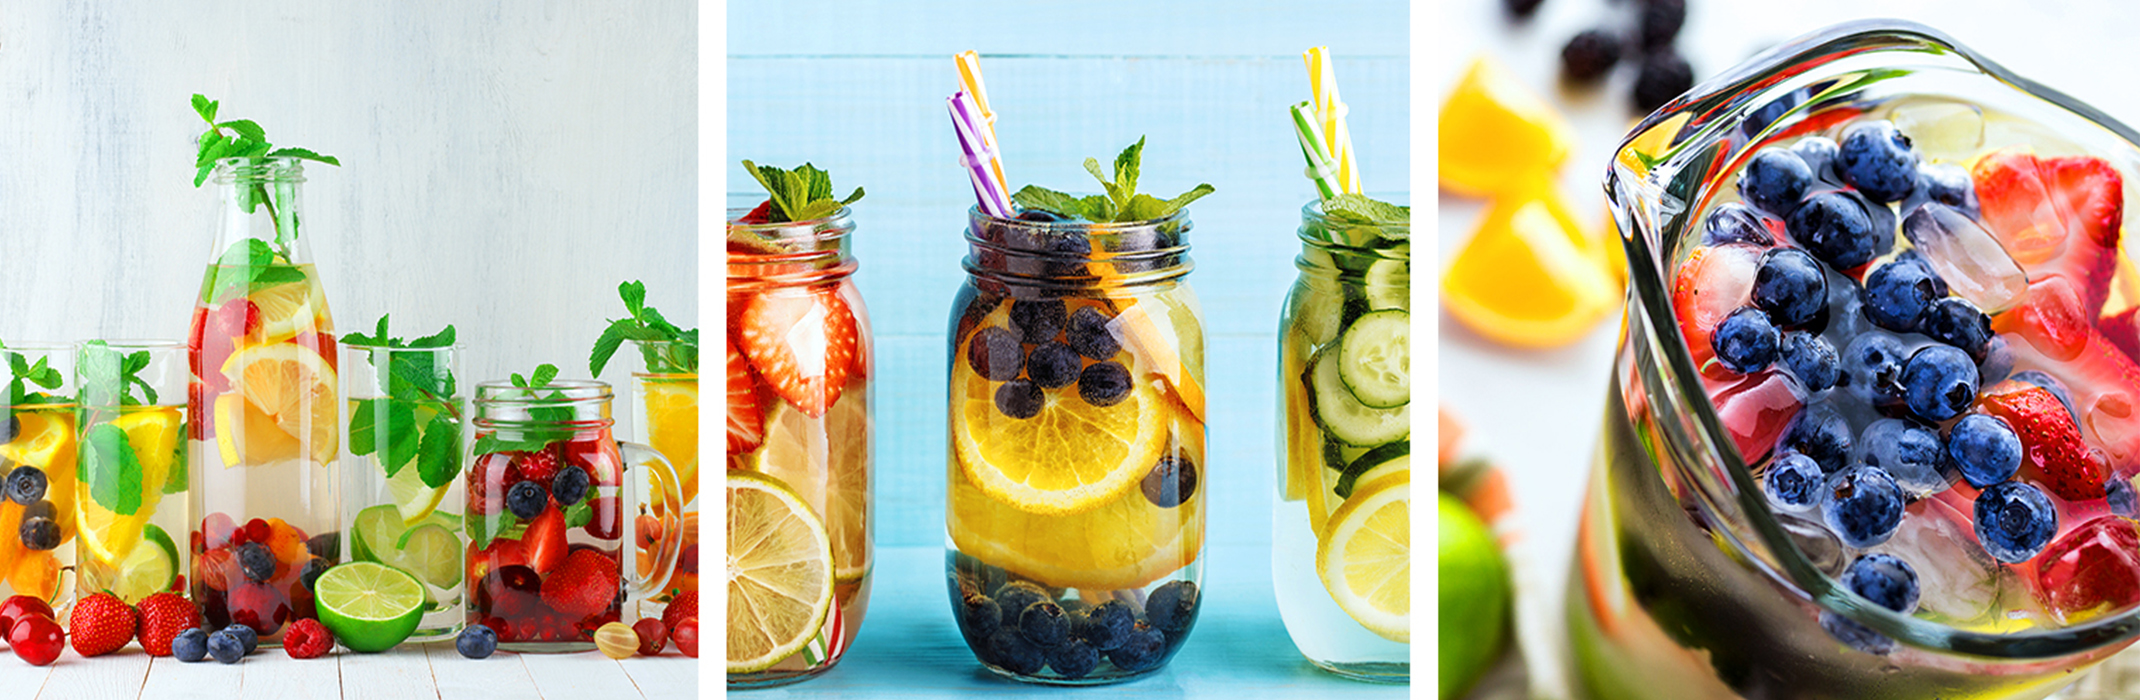 3 images: glass jars filled with water and fresh fruits and herbs; 3 glass mason jars filled with water and fresh fruits and herbs and coloful striped straws; and a closeup of a glass pitcher with water and blueberreis and strawberries, with lemons and limes in the background